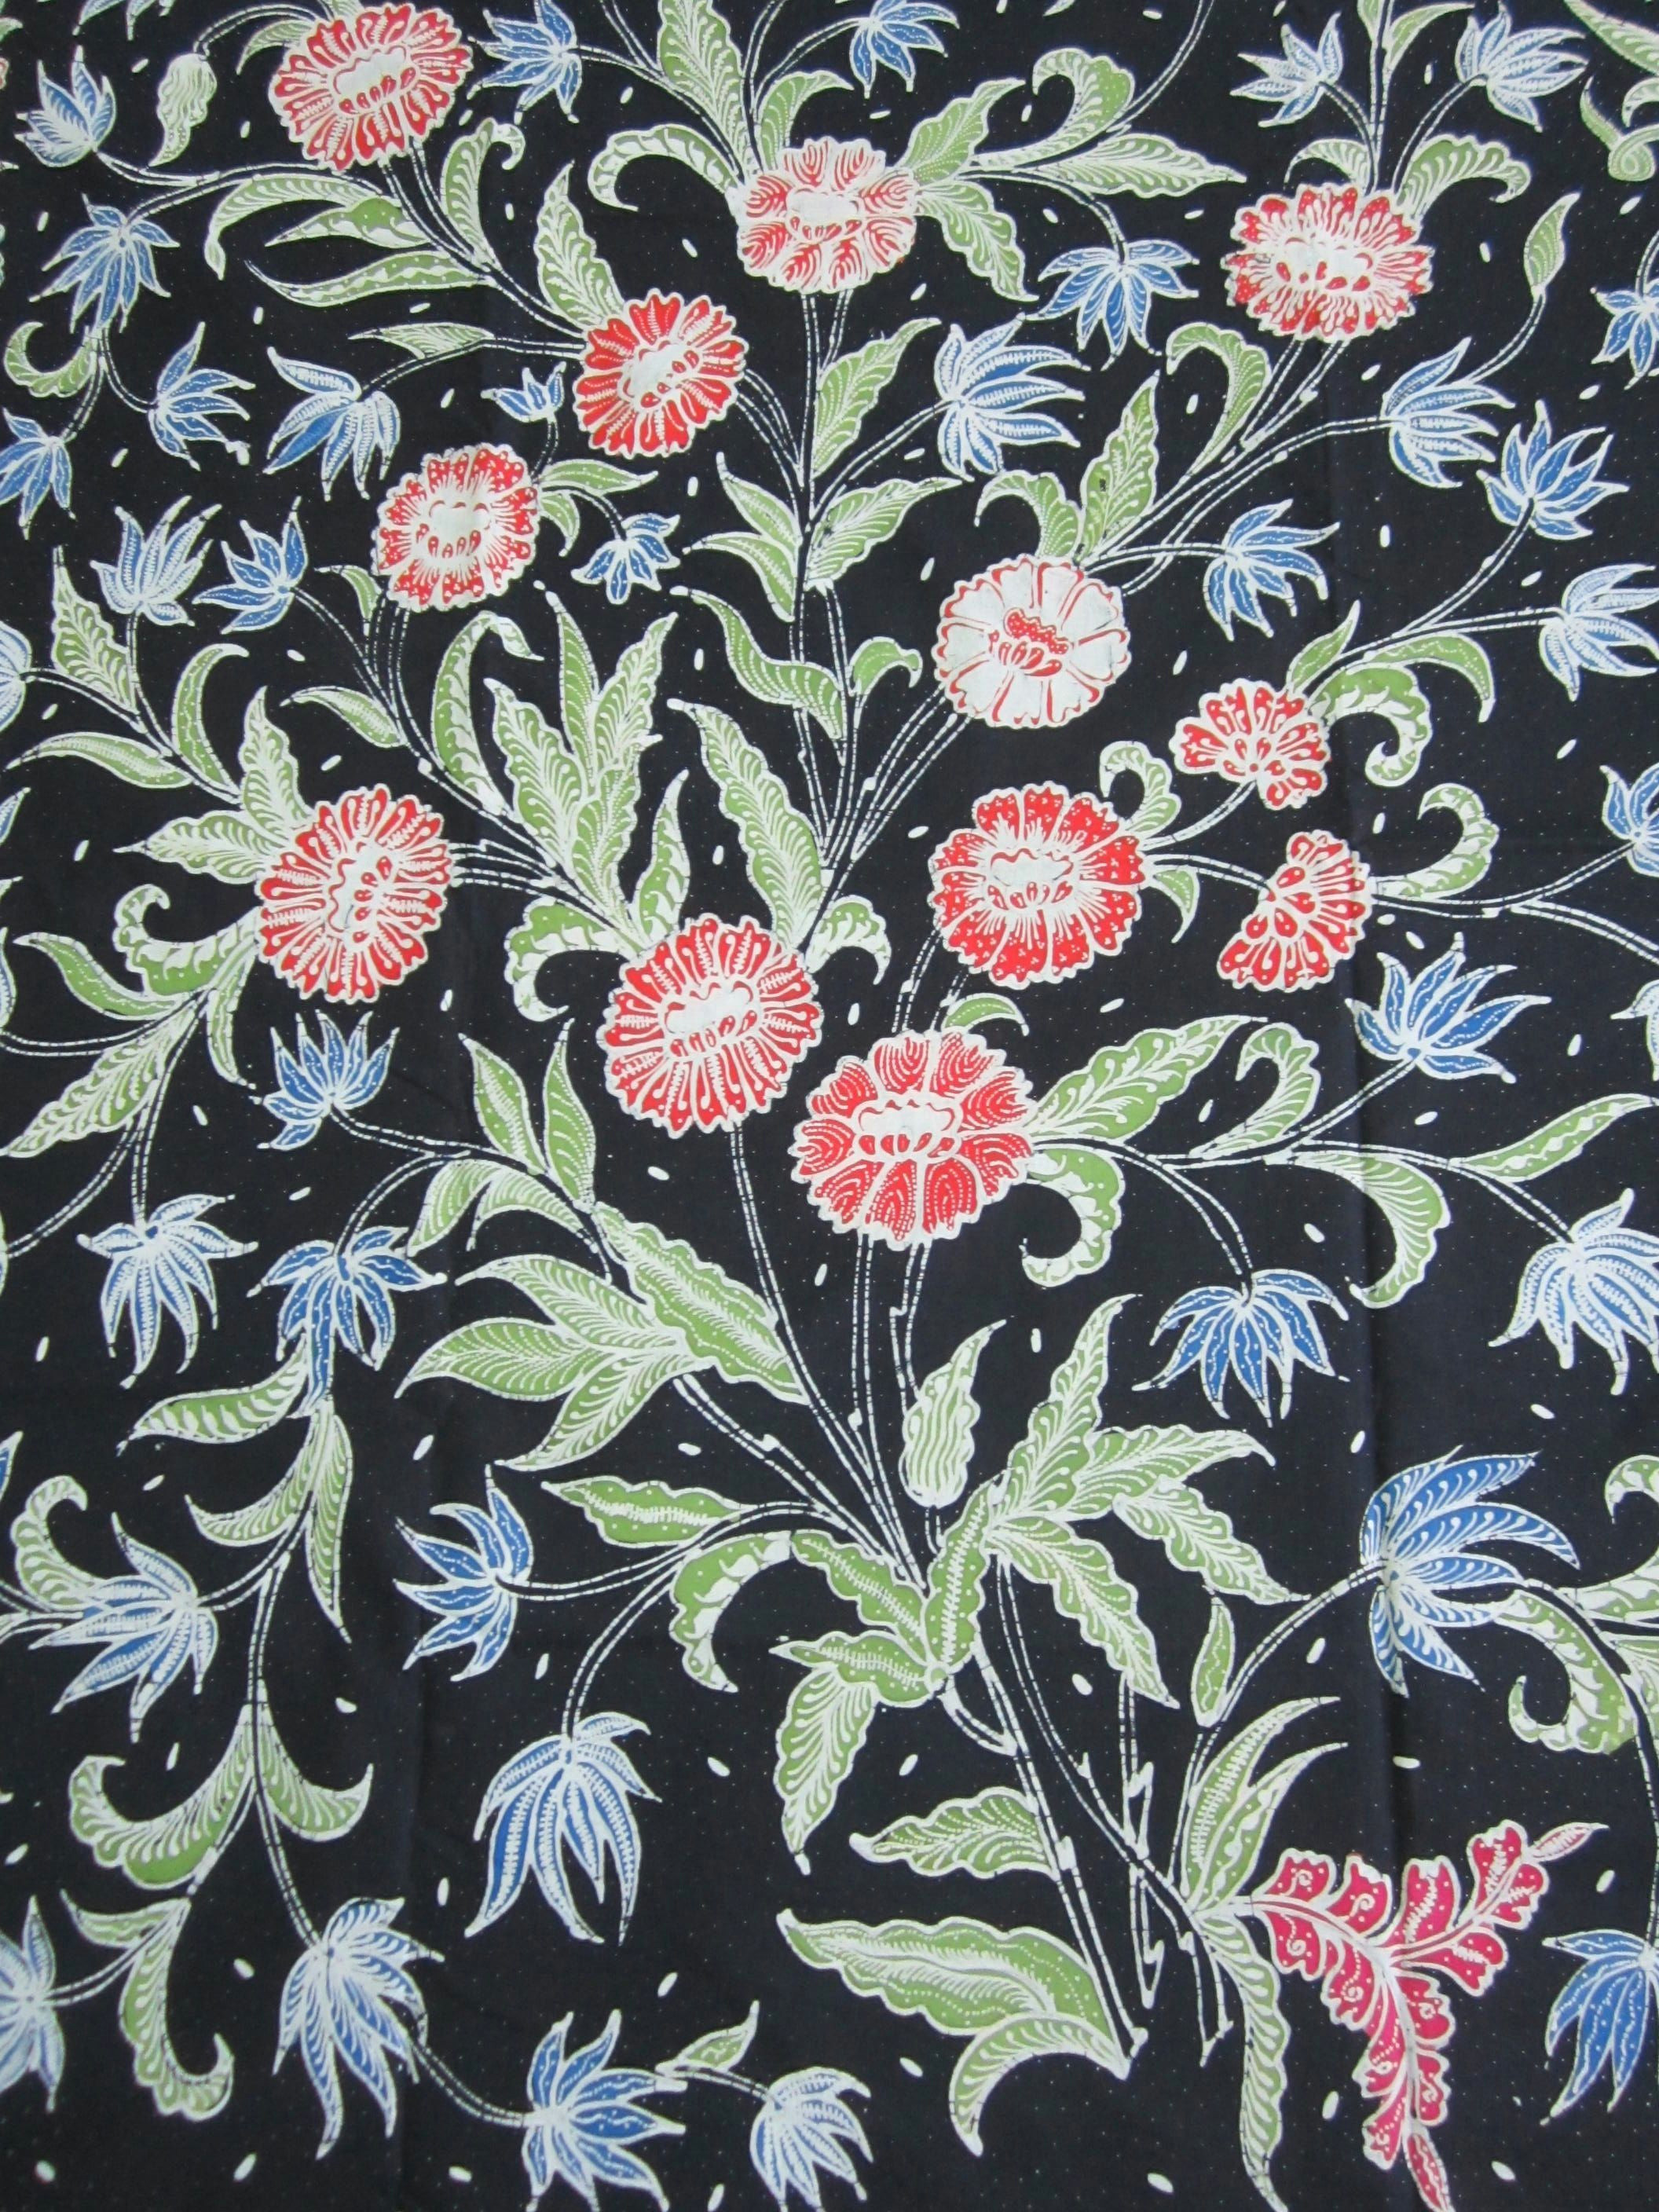 floral tulis batik on navy blue background from java indonesia